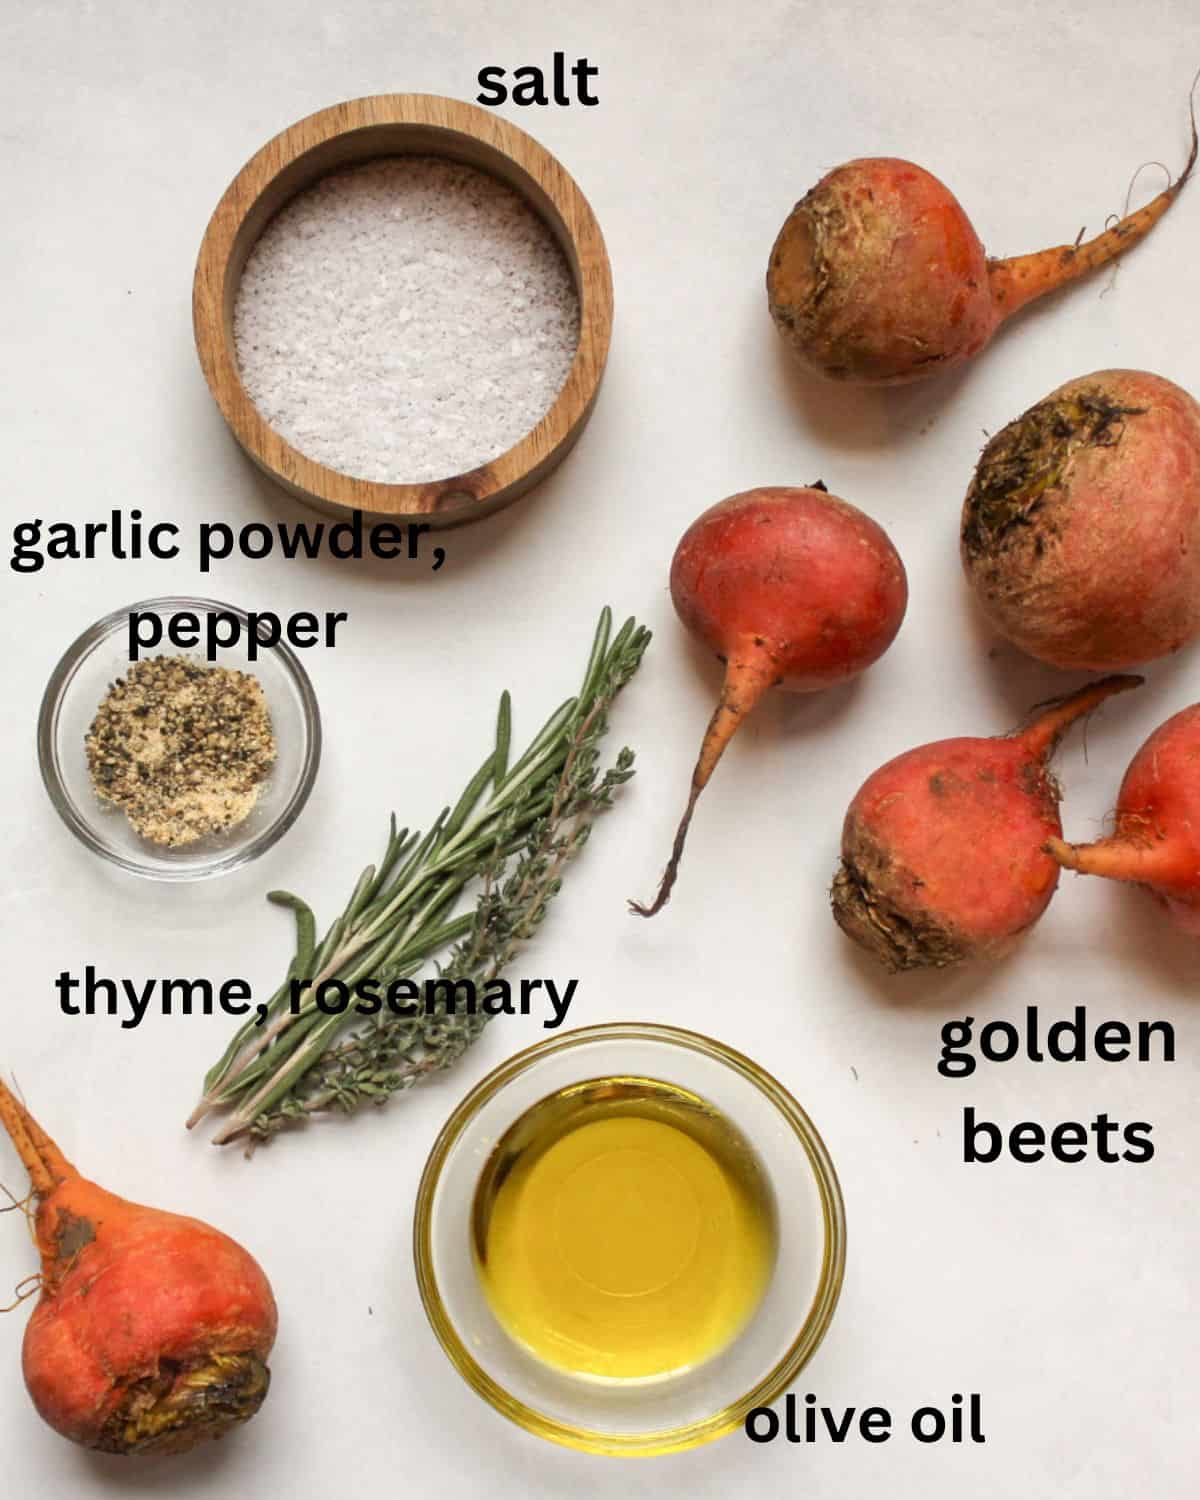 Recipe ingredients on a white background labeled as salt, garlic powder, pepper, thyme, rosemary, olive oil, golden beets.